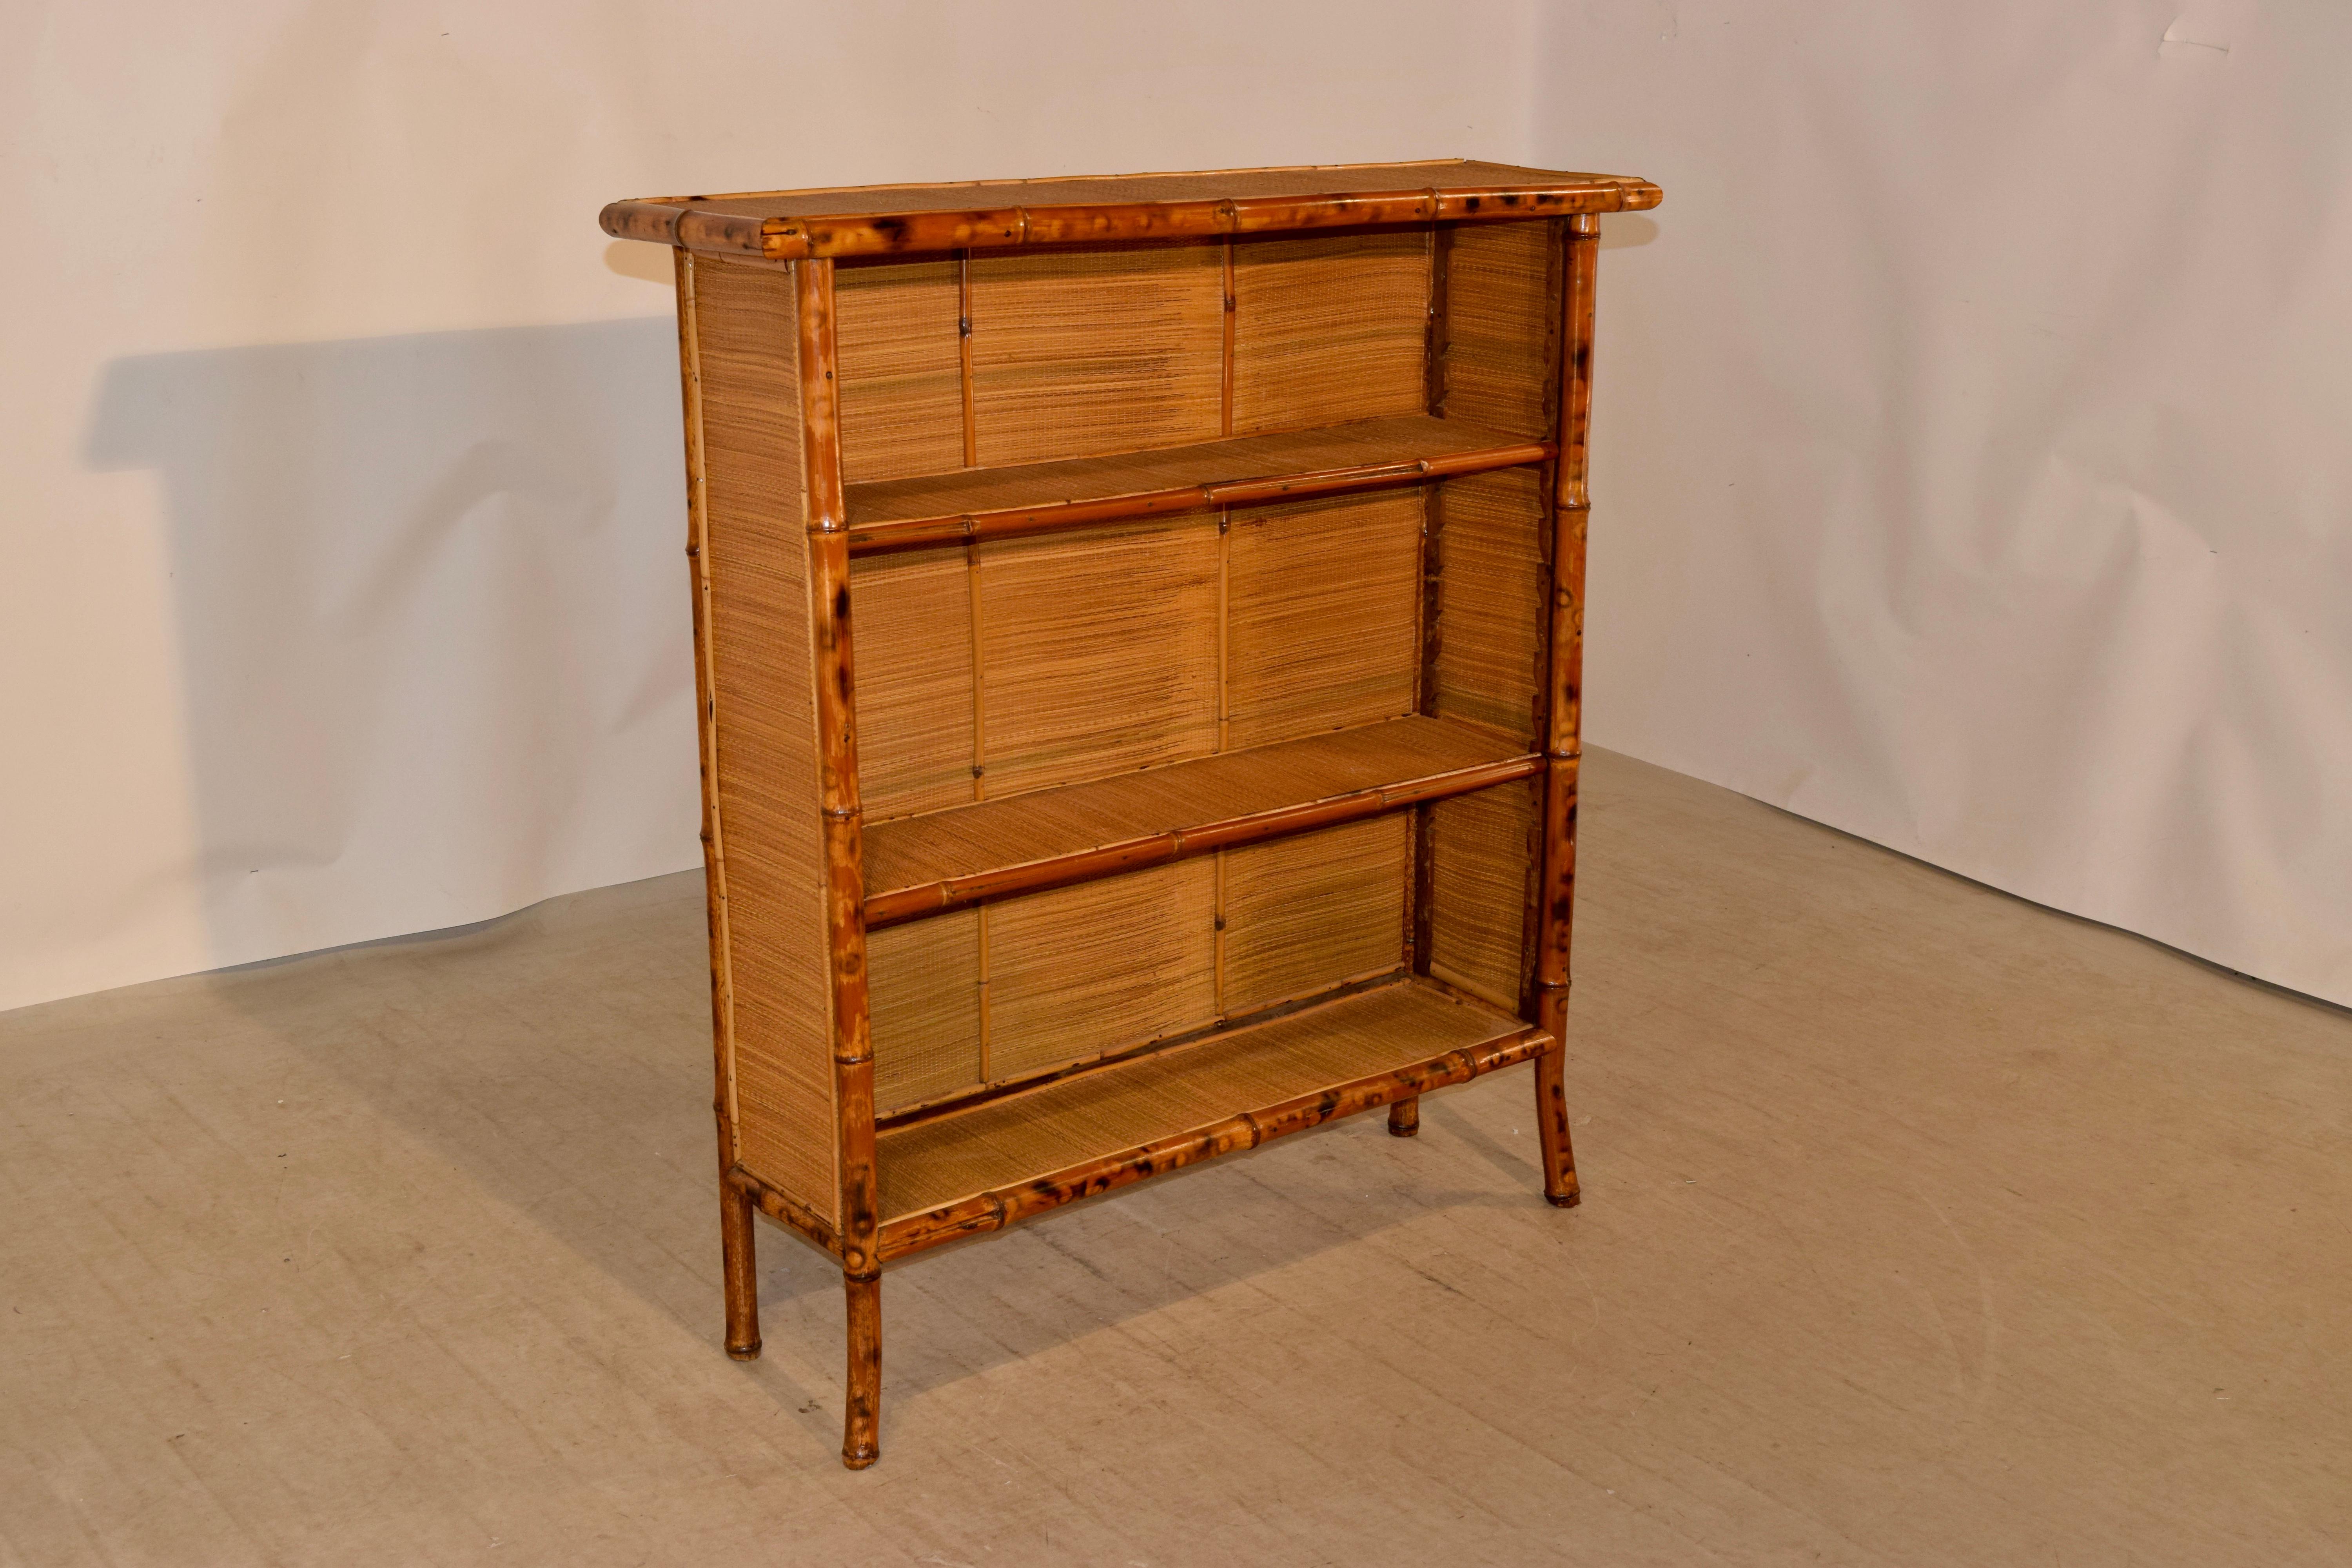 19th century tortoise bamboo bookcase from France with rush covered top, sides, shelves and interior. The bookcase is supported on splayed legs for a lovely added decorative accent.